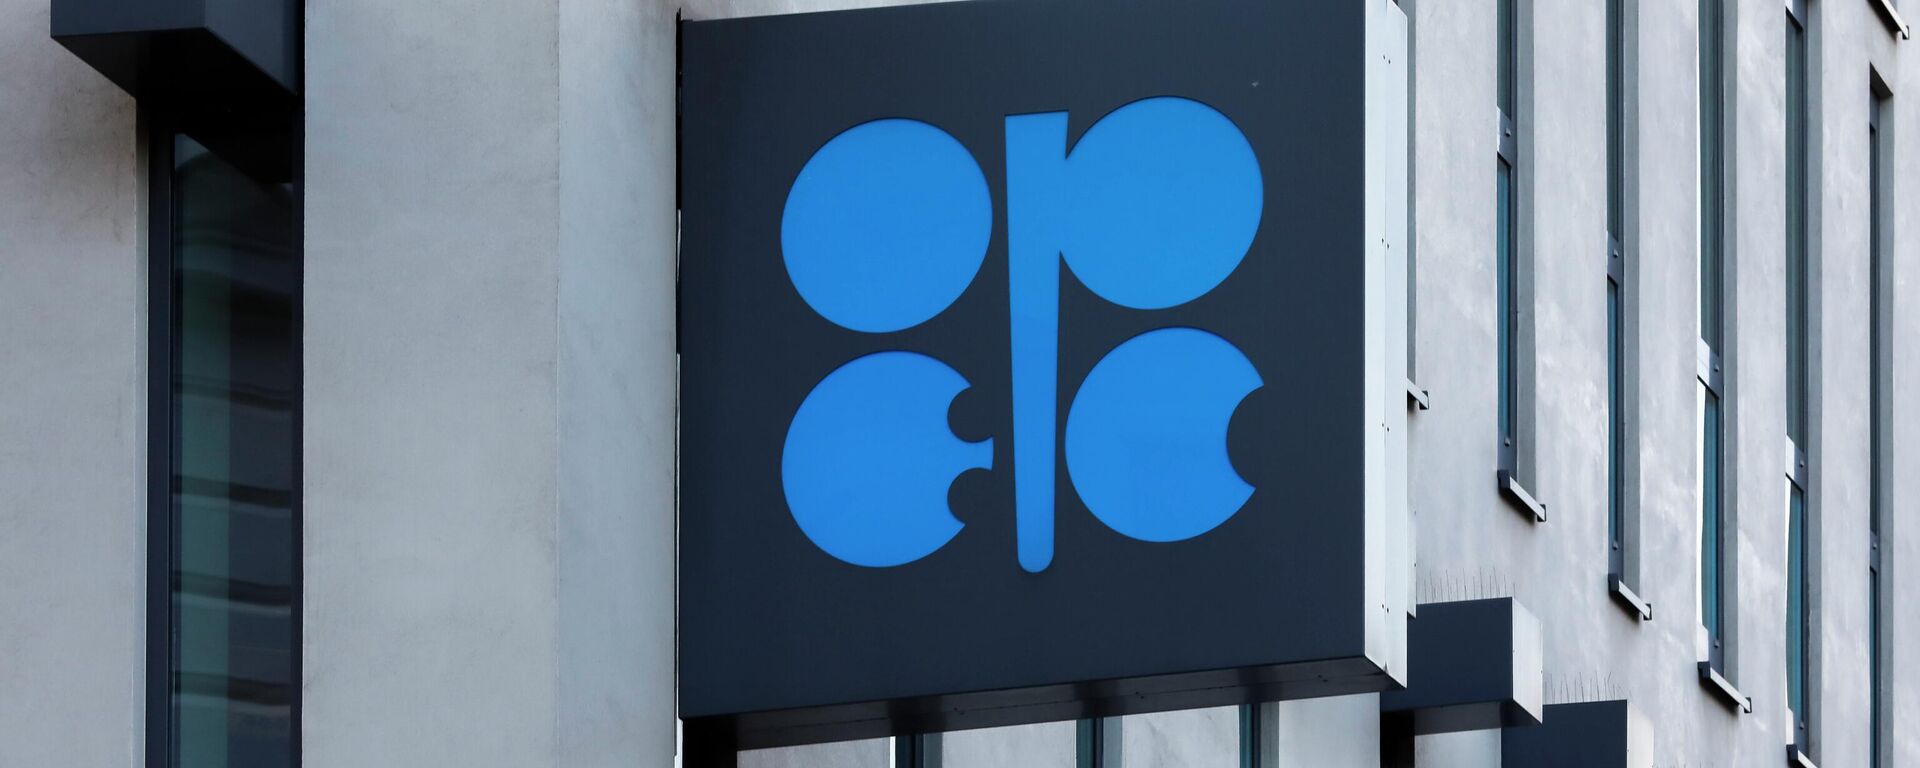 The logo of the Organization of the Petroleum Exporting Countries (OPEC) is seen outside of OPEC's headquarters in Vienna, Austria, Thursday, March 3, 2022.  - Sputnik International, 1920, 08.11.2022